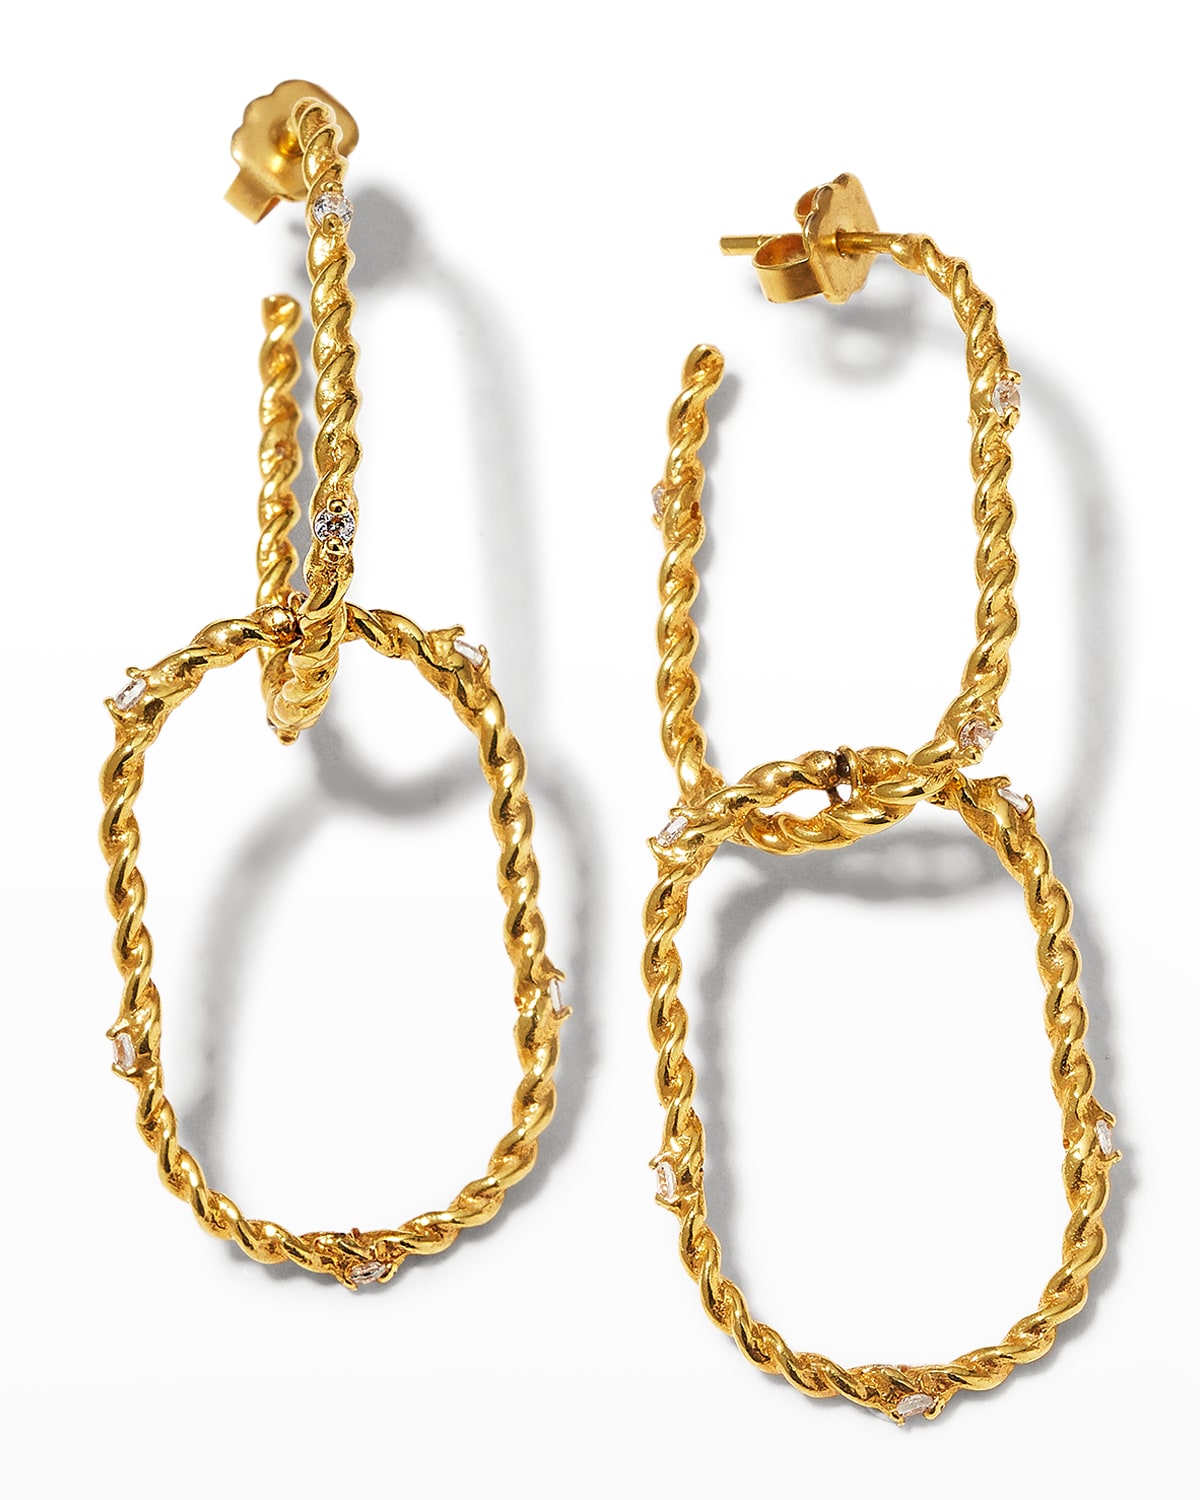 Joanna Laura Constantine Gold Plated Twisted Link Wire Earrings with Stones